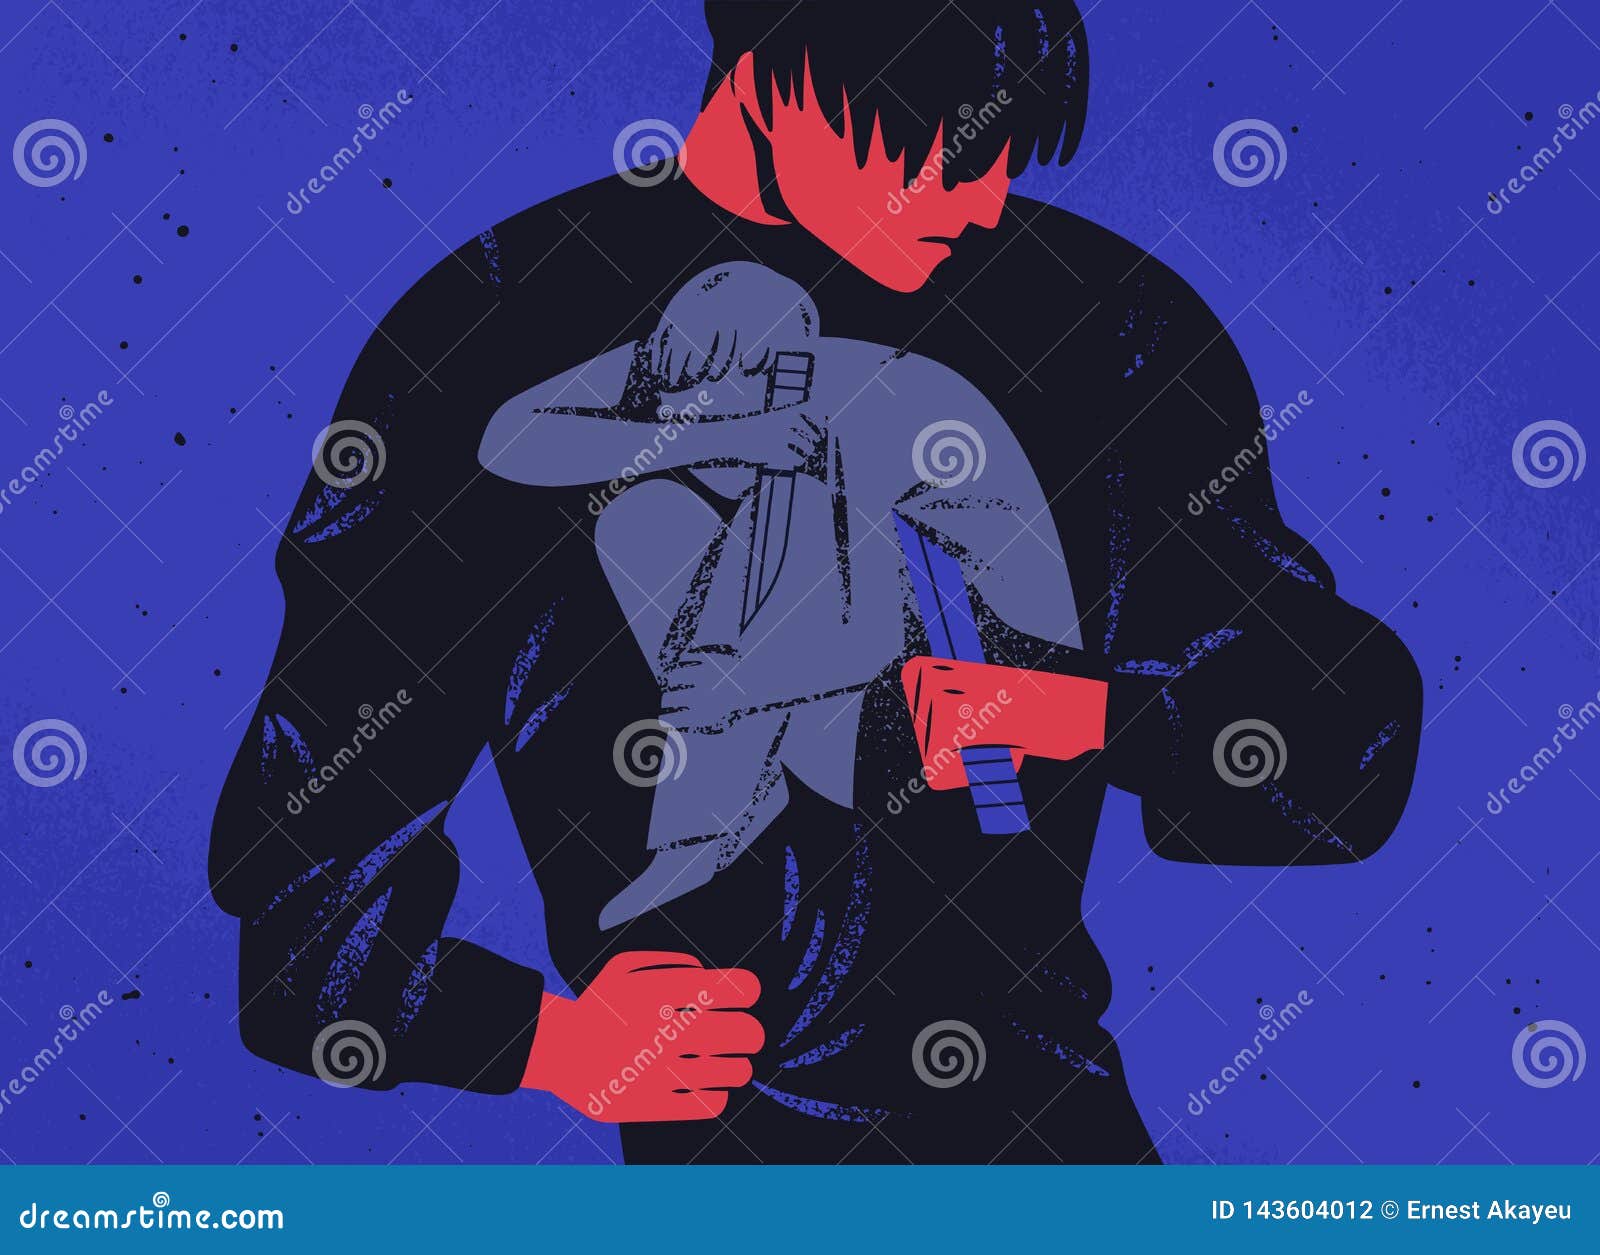 sad man and his inner personality holding knife. concept of internal fight, war, struggle with self, wrestle with